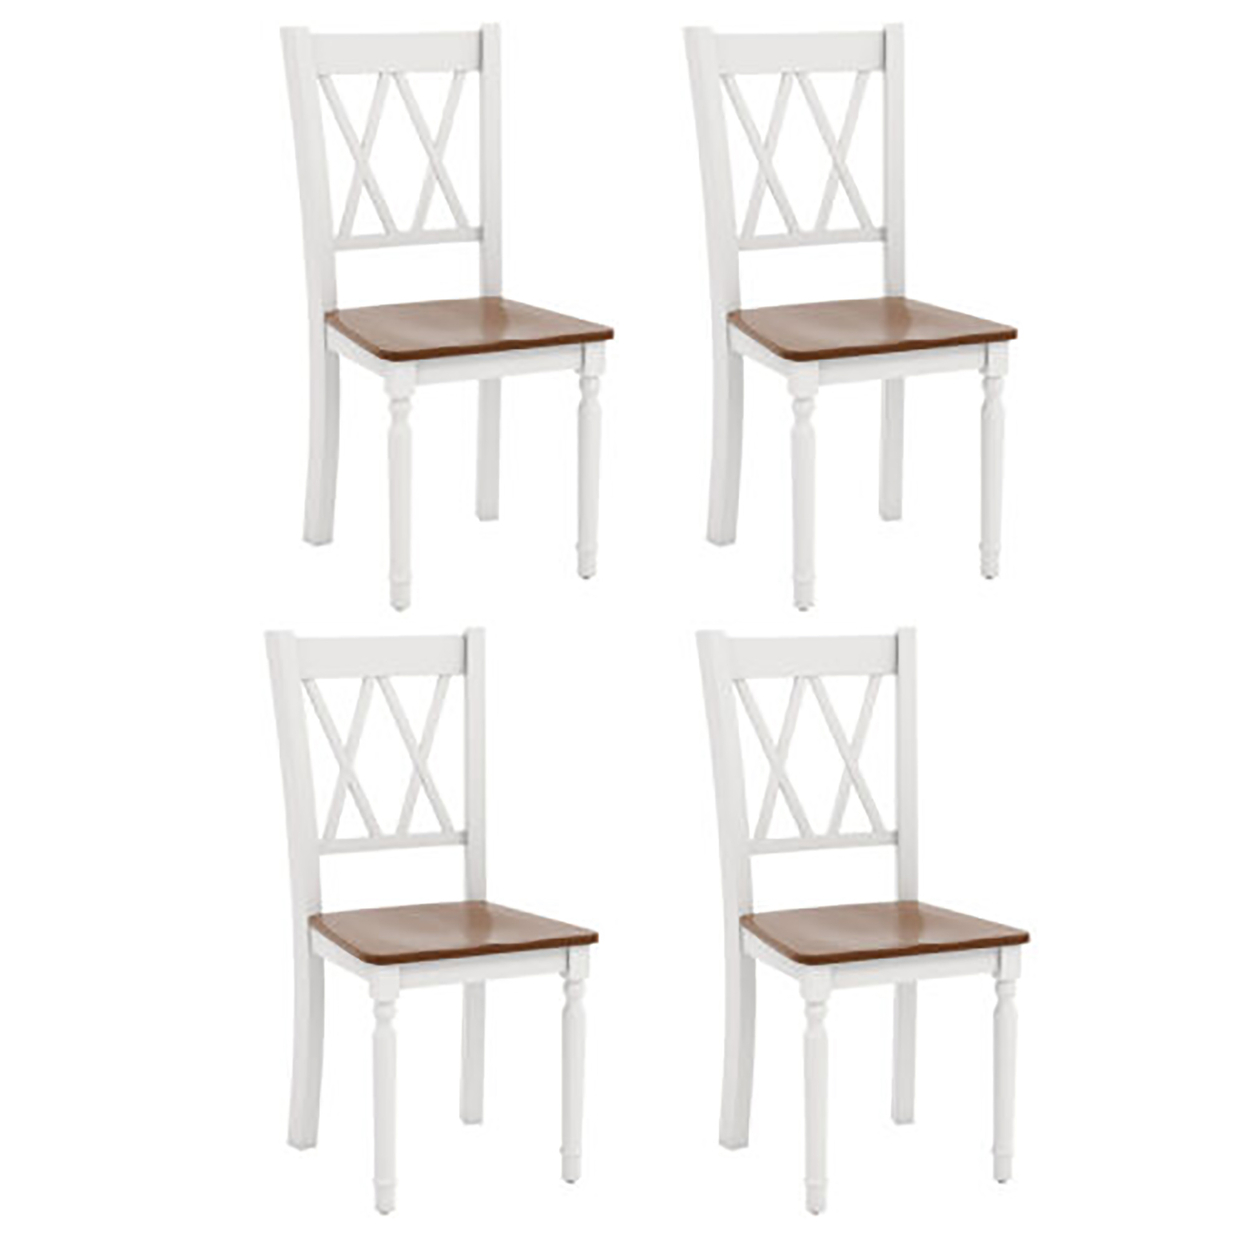 Dining Chairs Set Of 4 Wood Farmhouse Dining Room Side Chairs For Home Kitchen